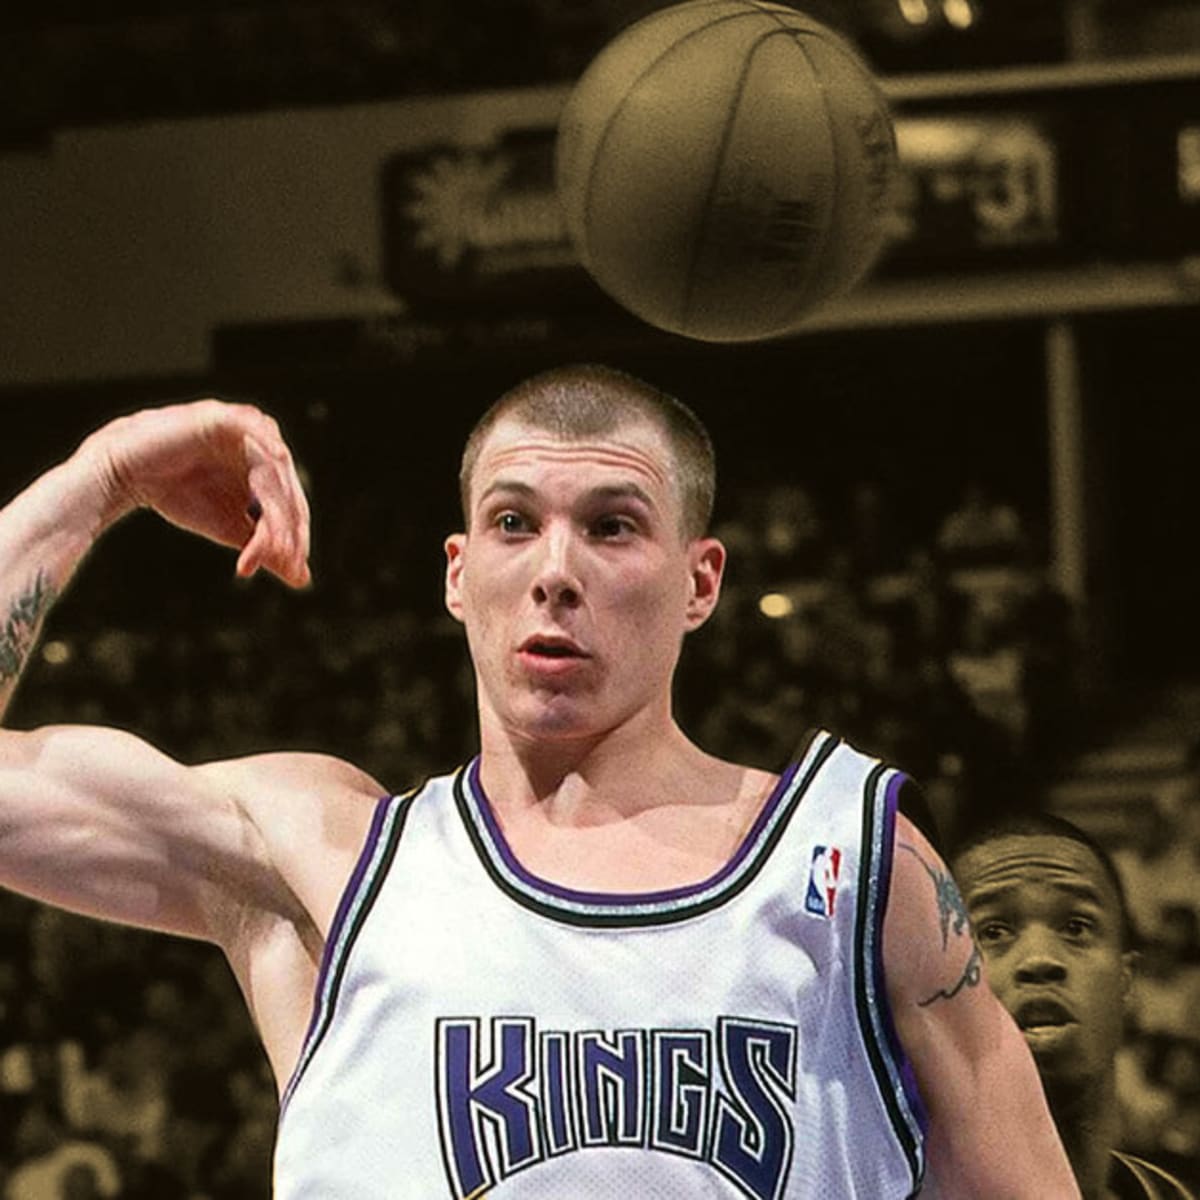 Jason 'White Chocolate' Williams Reacts To His NBA Highlights